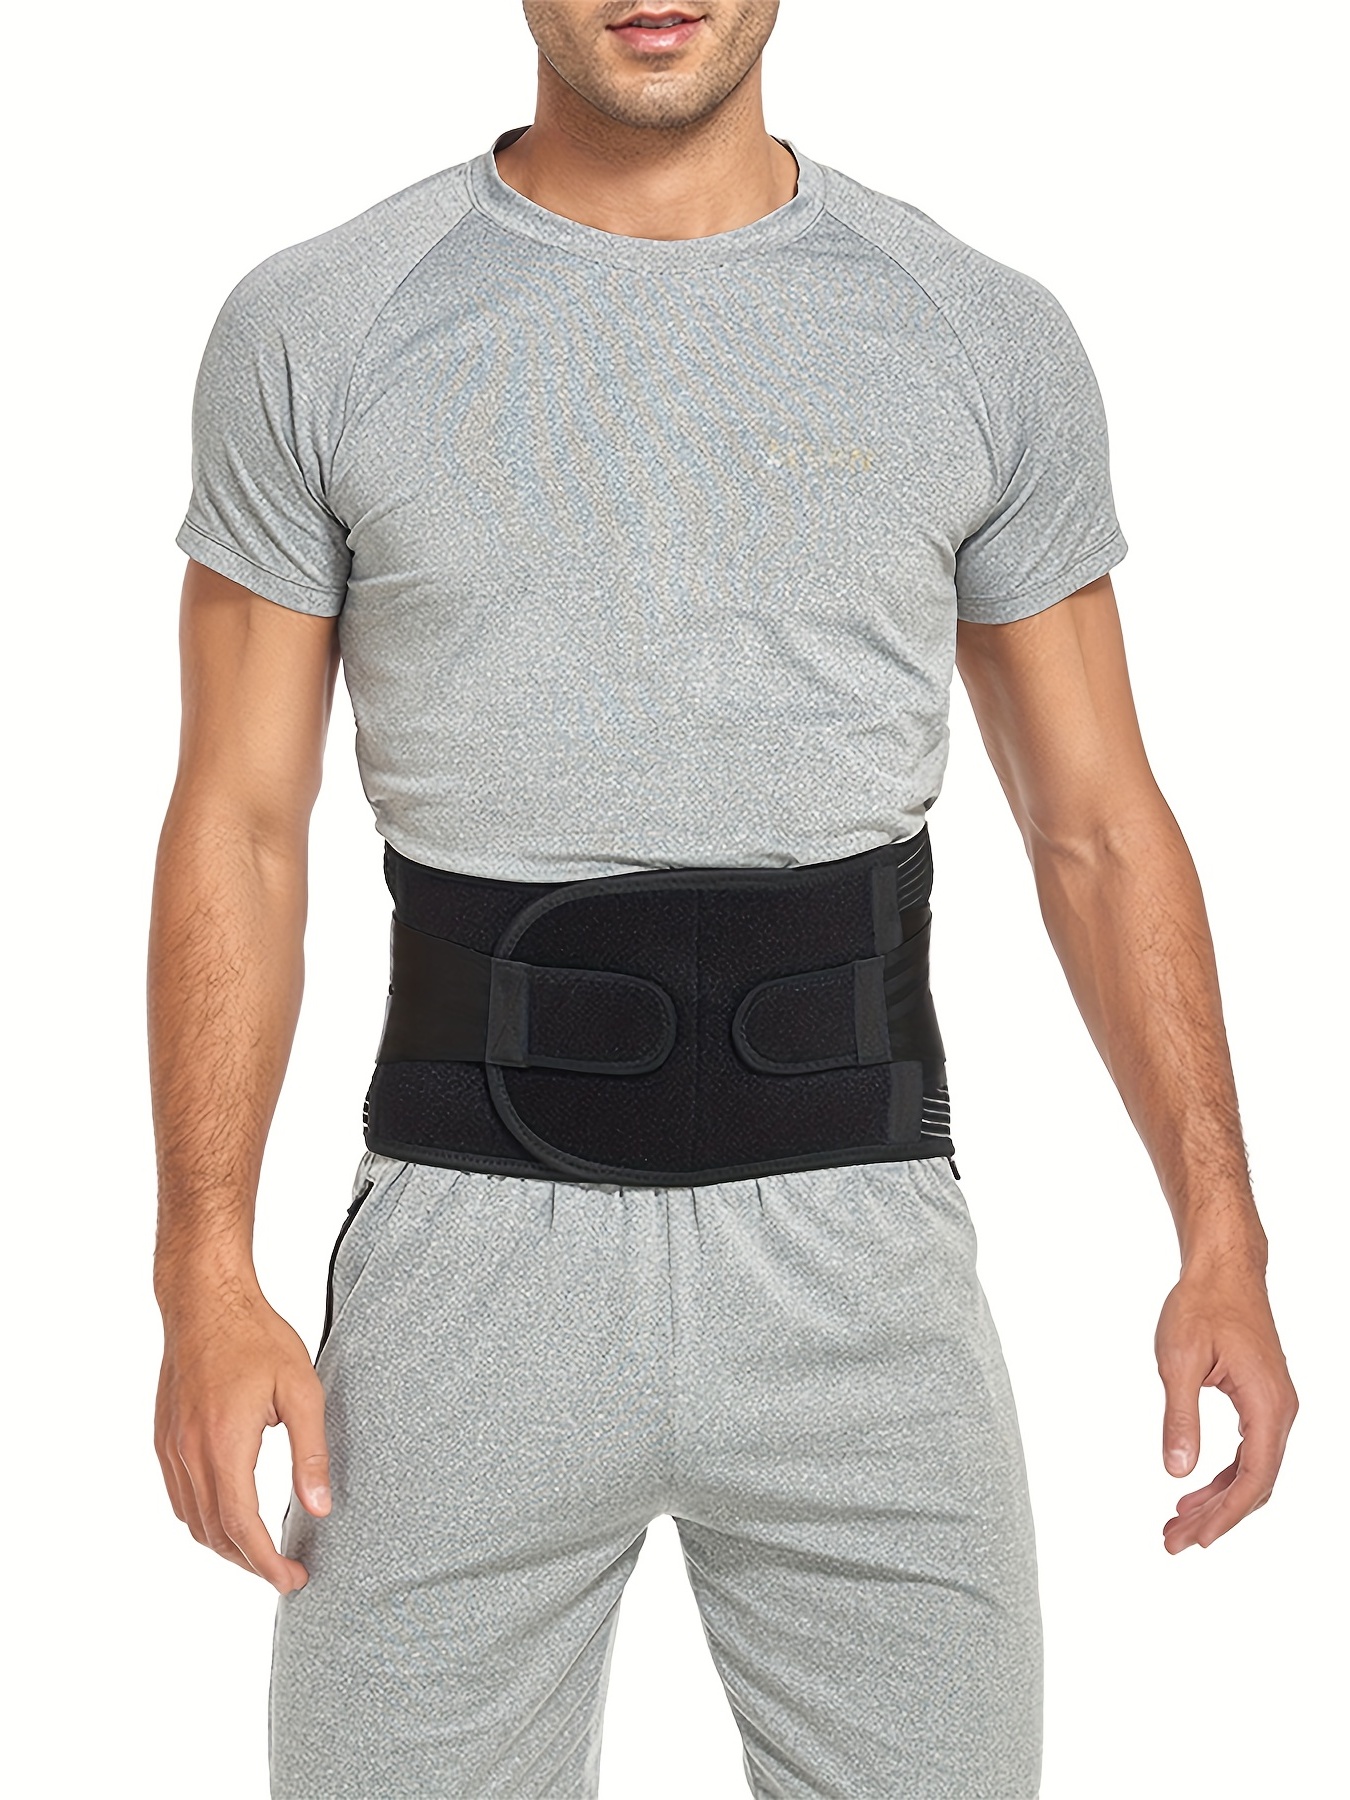 FREETOO Back Brace for Women Men Lower Back Pain Relief with 6